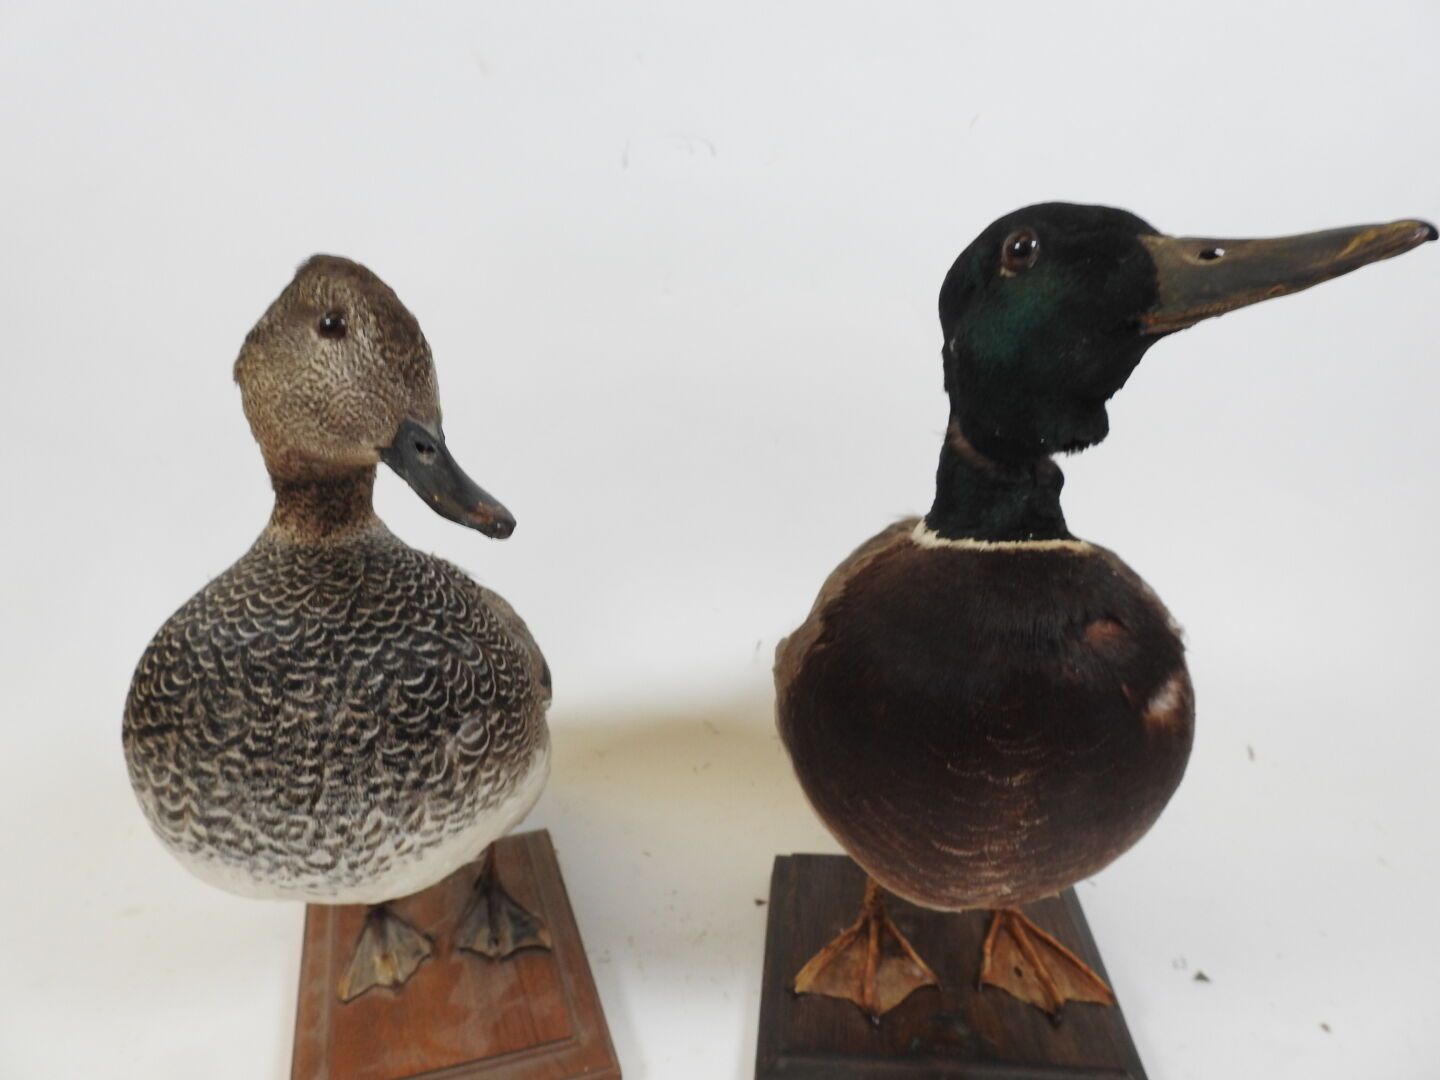 Null Two naturalized ducks on a wooden base.

Wear.